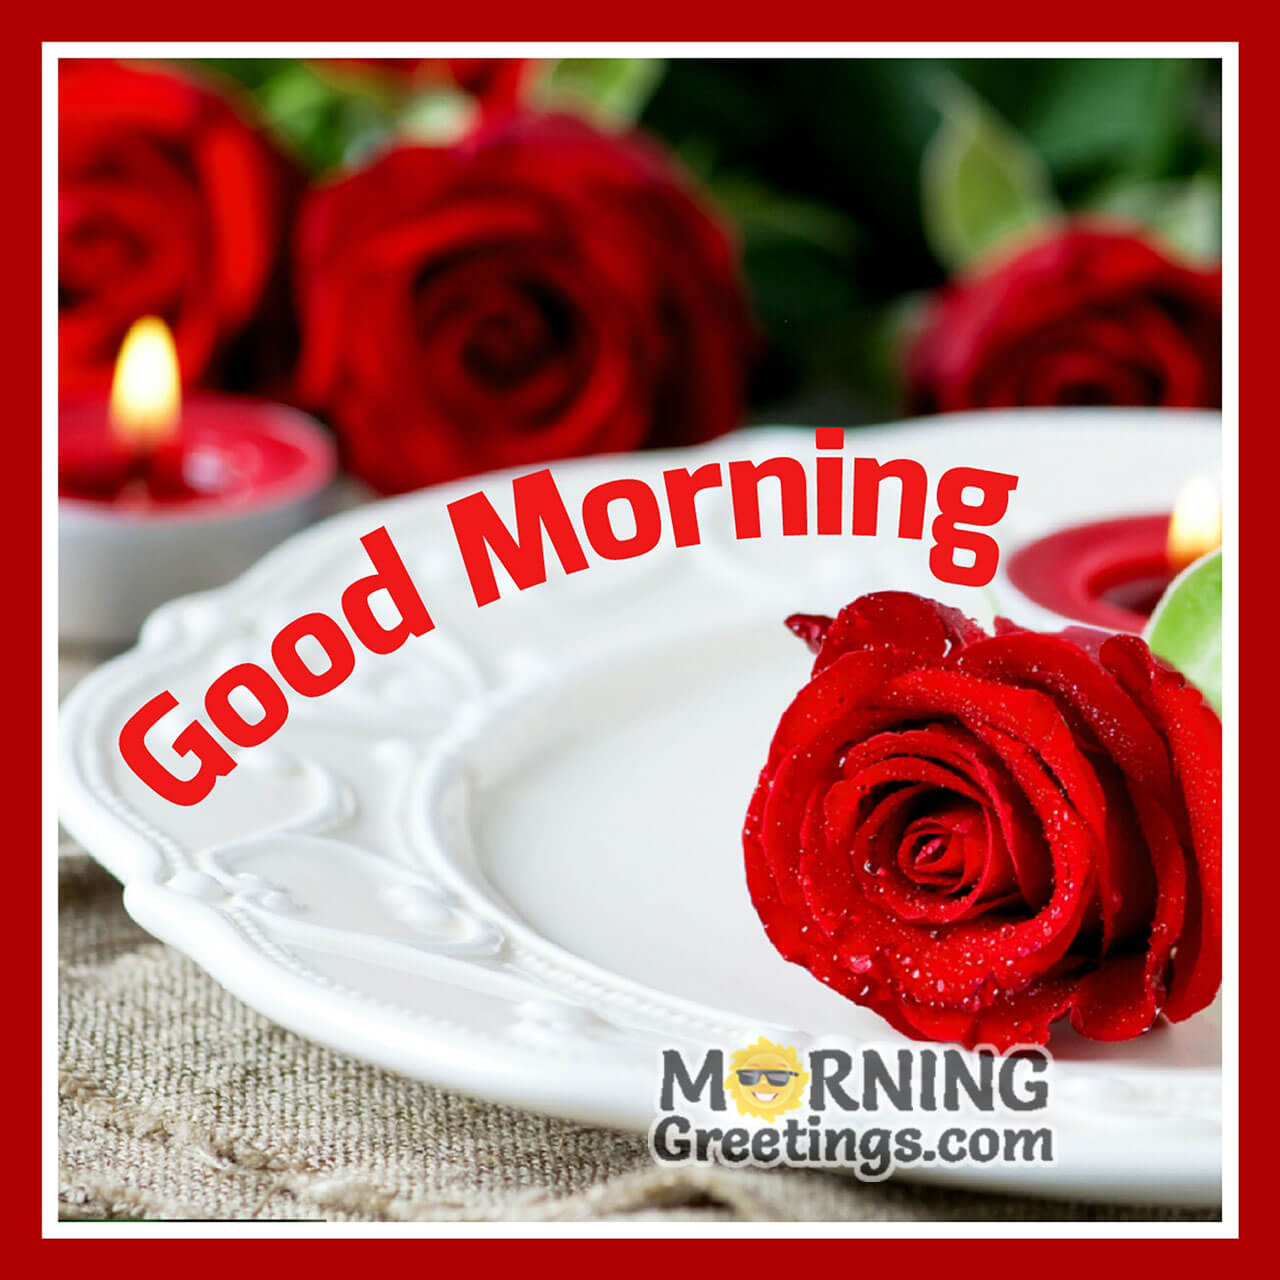 Awe-inspiring Collection of 4K Full Good Morning Images with Red Rose